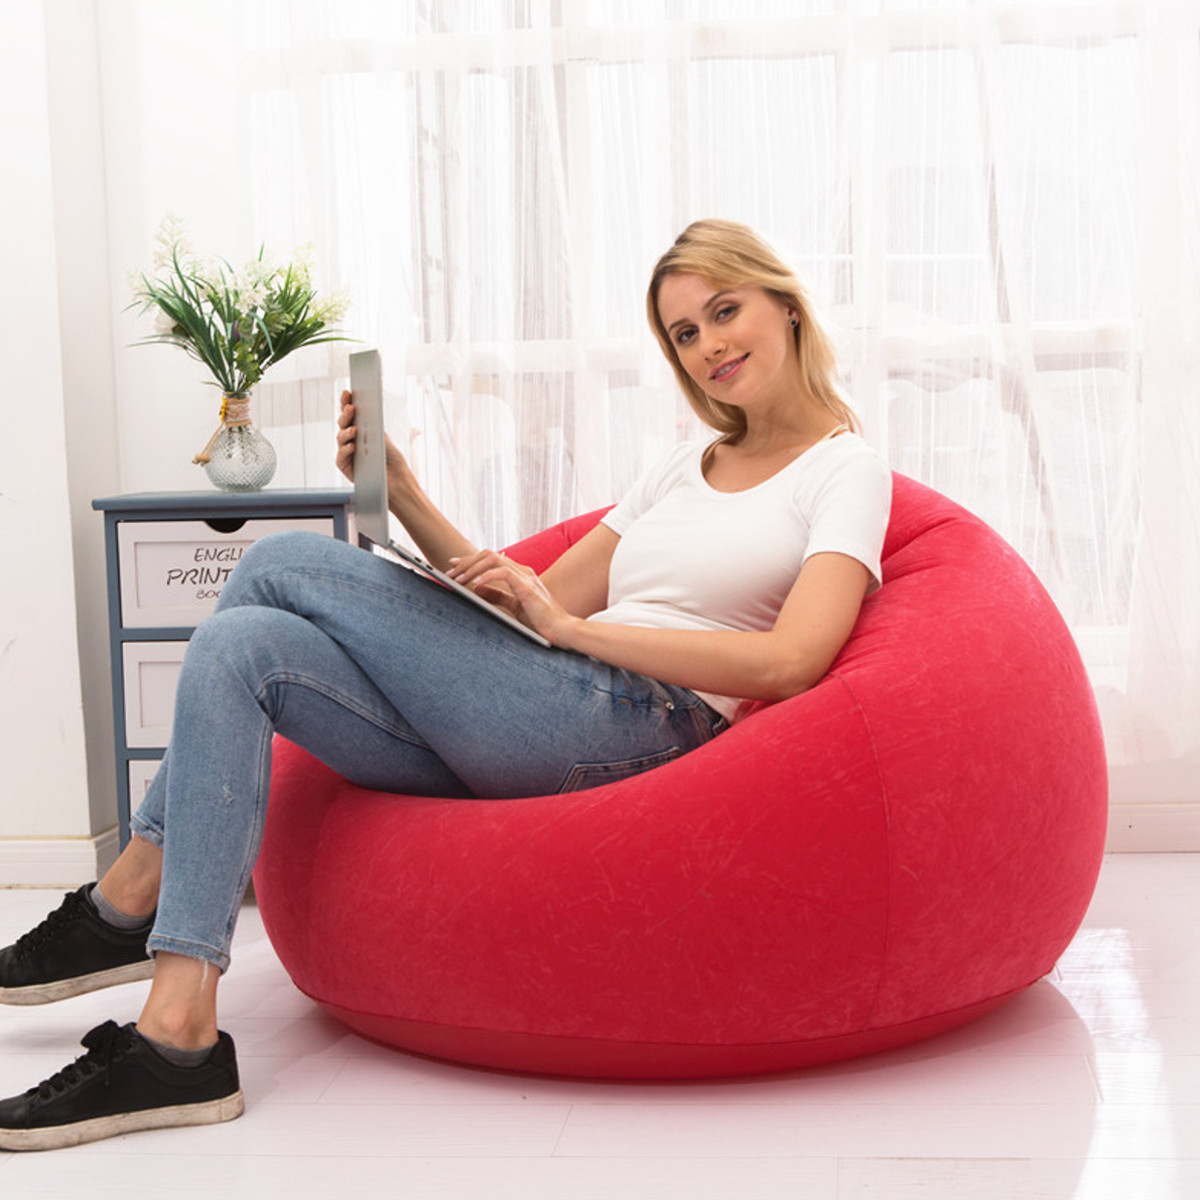 110x85cm-Large-Inflatable-Chair-Bean-Bag-PVC-IndoorOutdoor-Garden-Furniture-Lounge-Adult-Lazy-Sofa-N-1682288-8